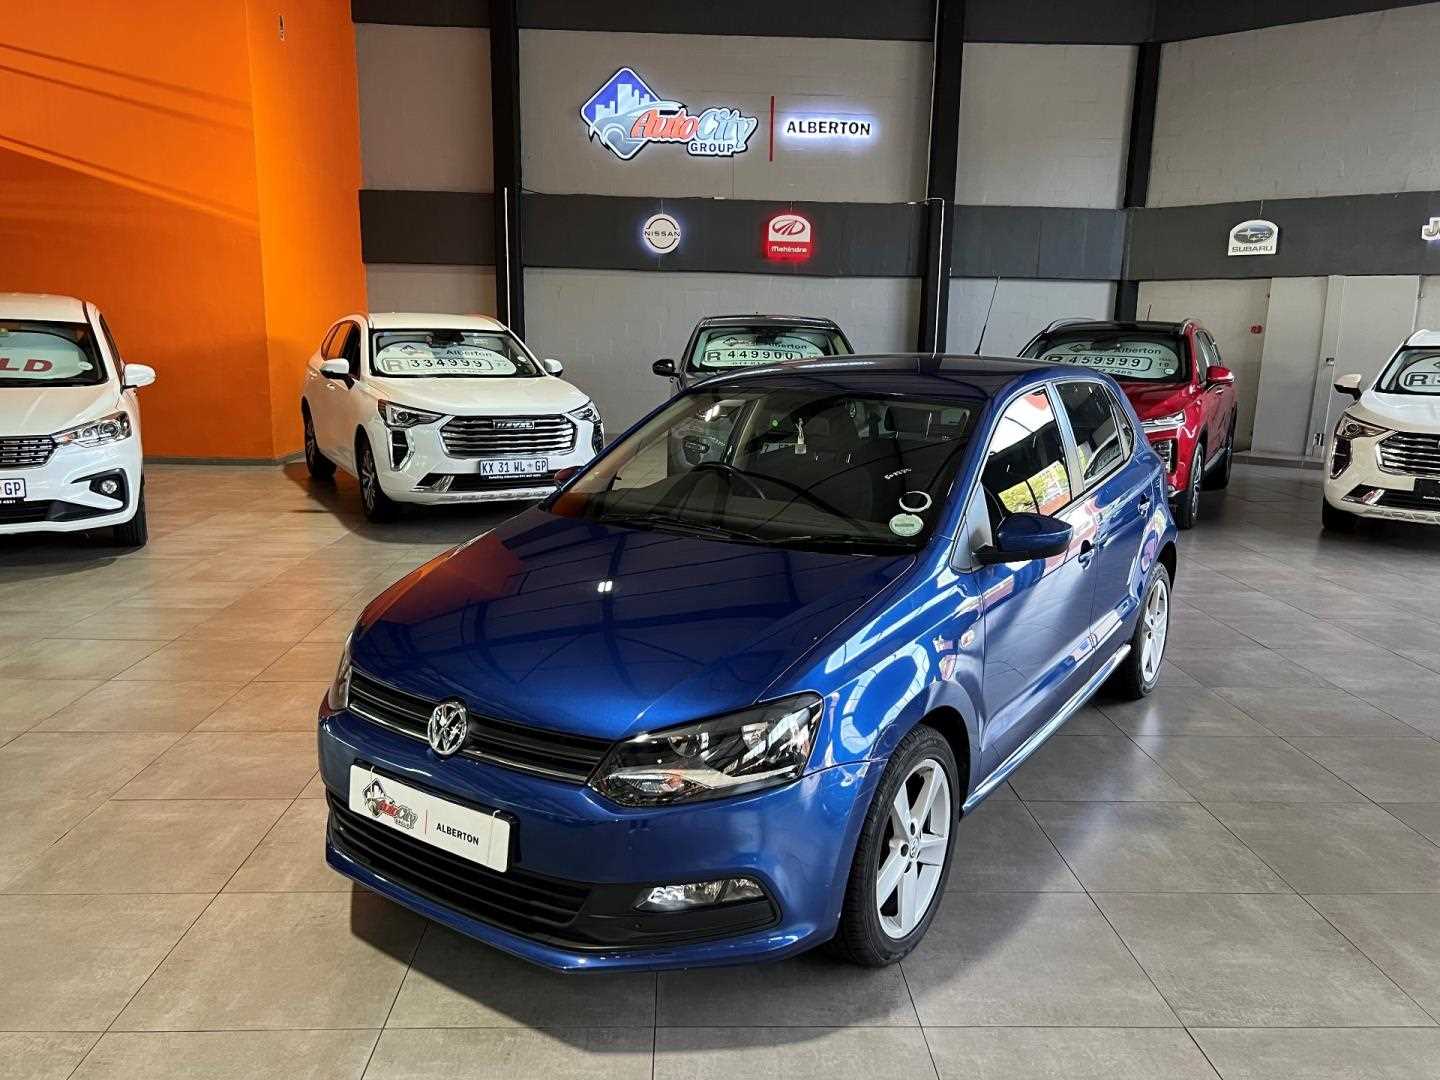 Volkswagen POLO VIVO 1.6 HIGHLINE (5DR) for Sale in South Africa